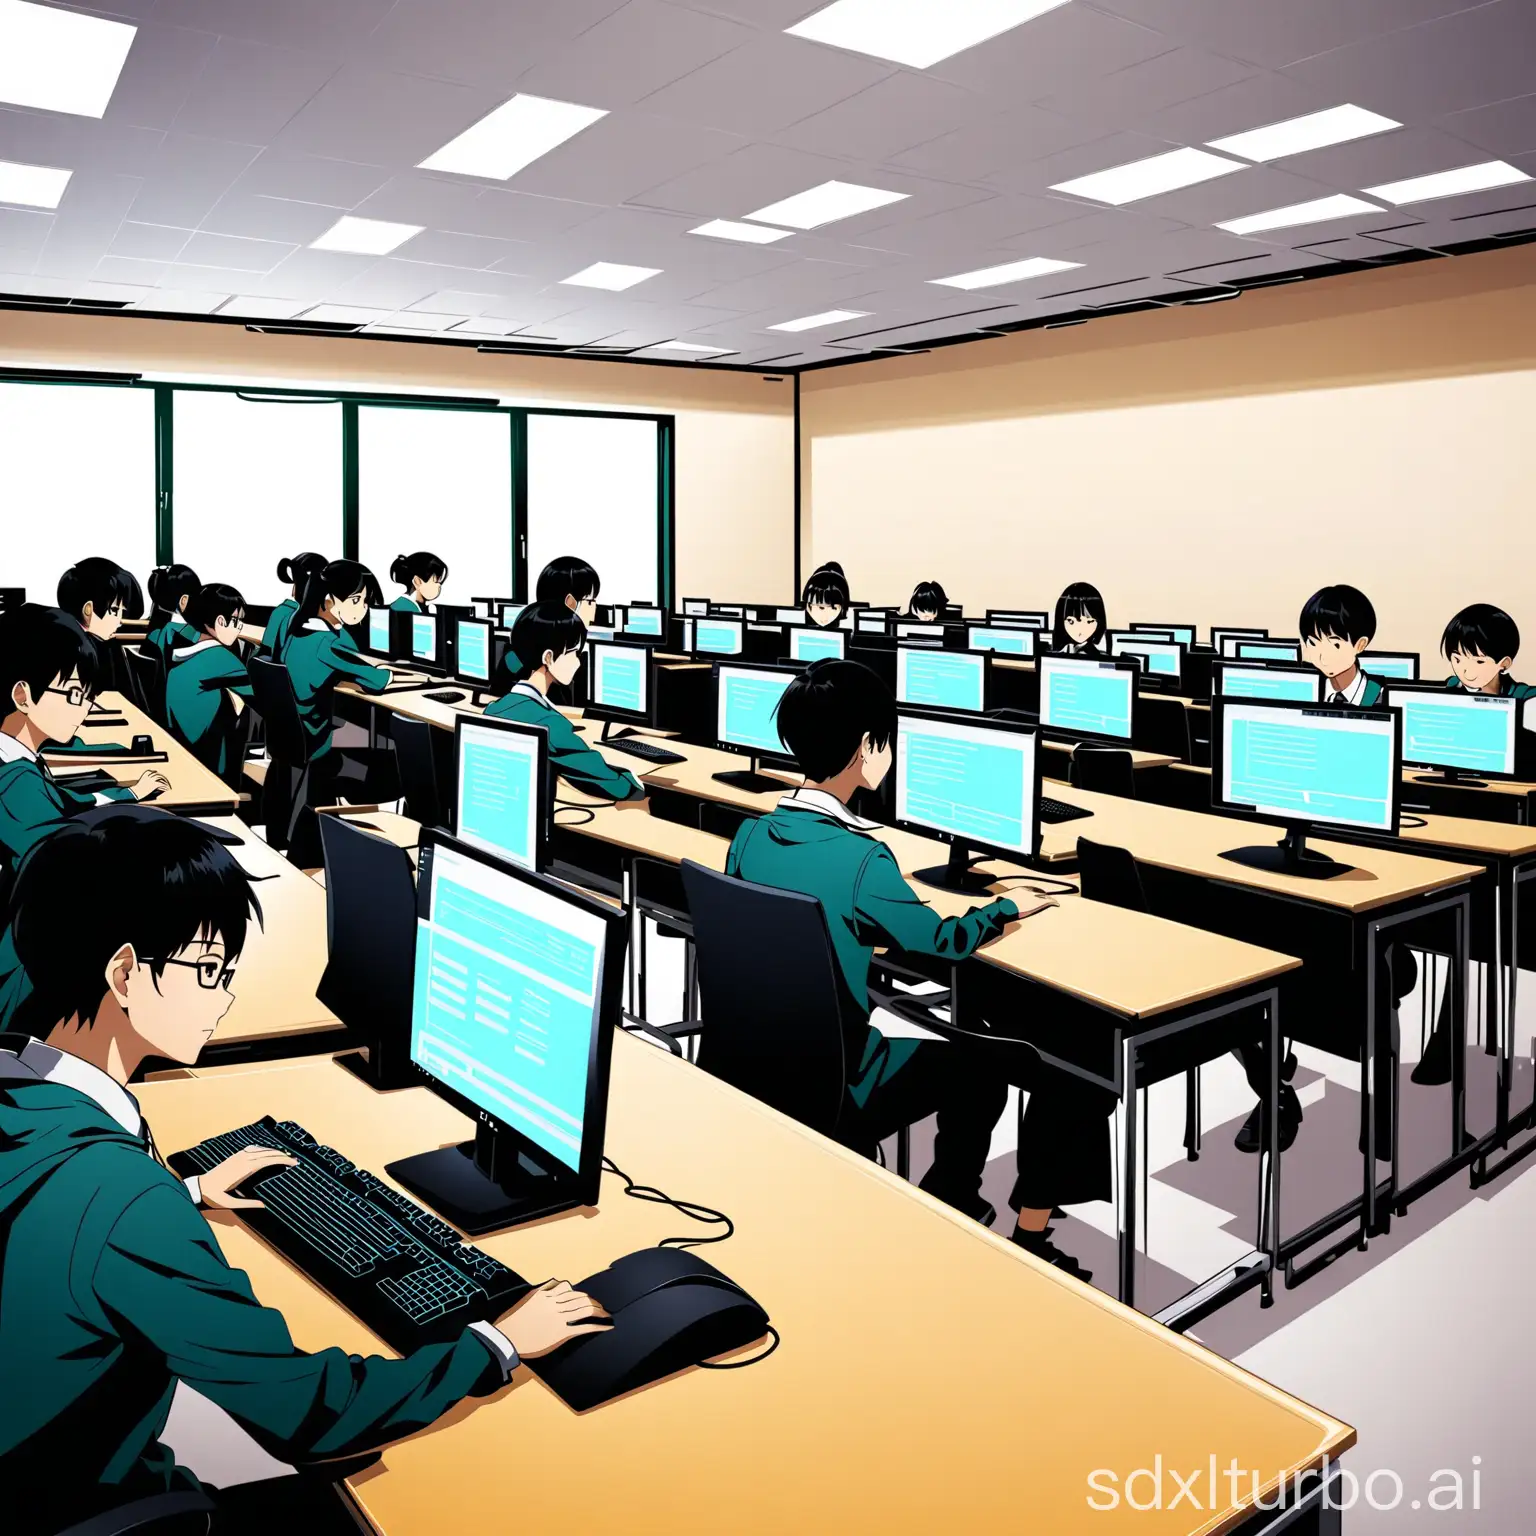 Students-Learning-in-a-Computer-Classroom-Setting